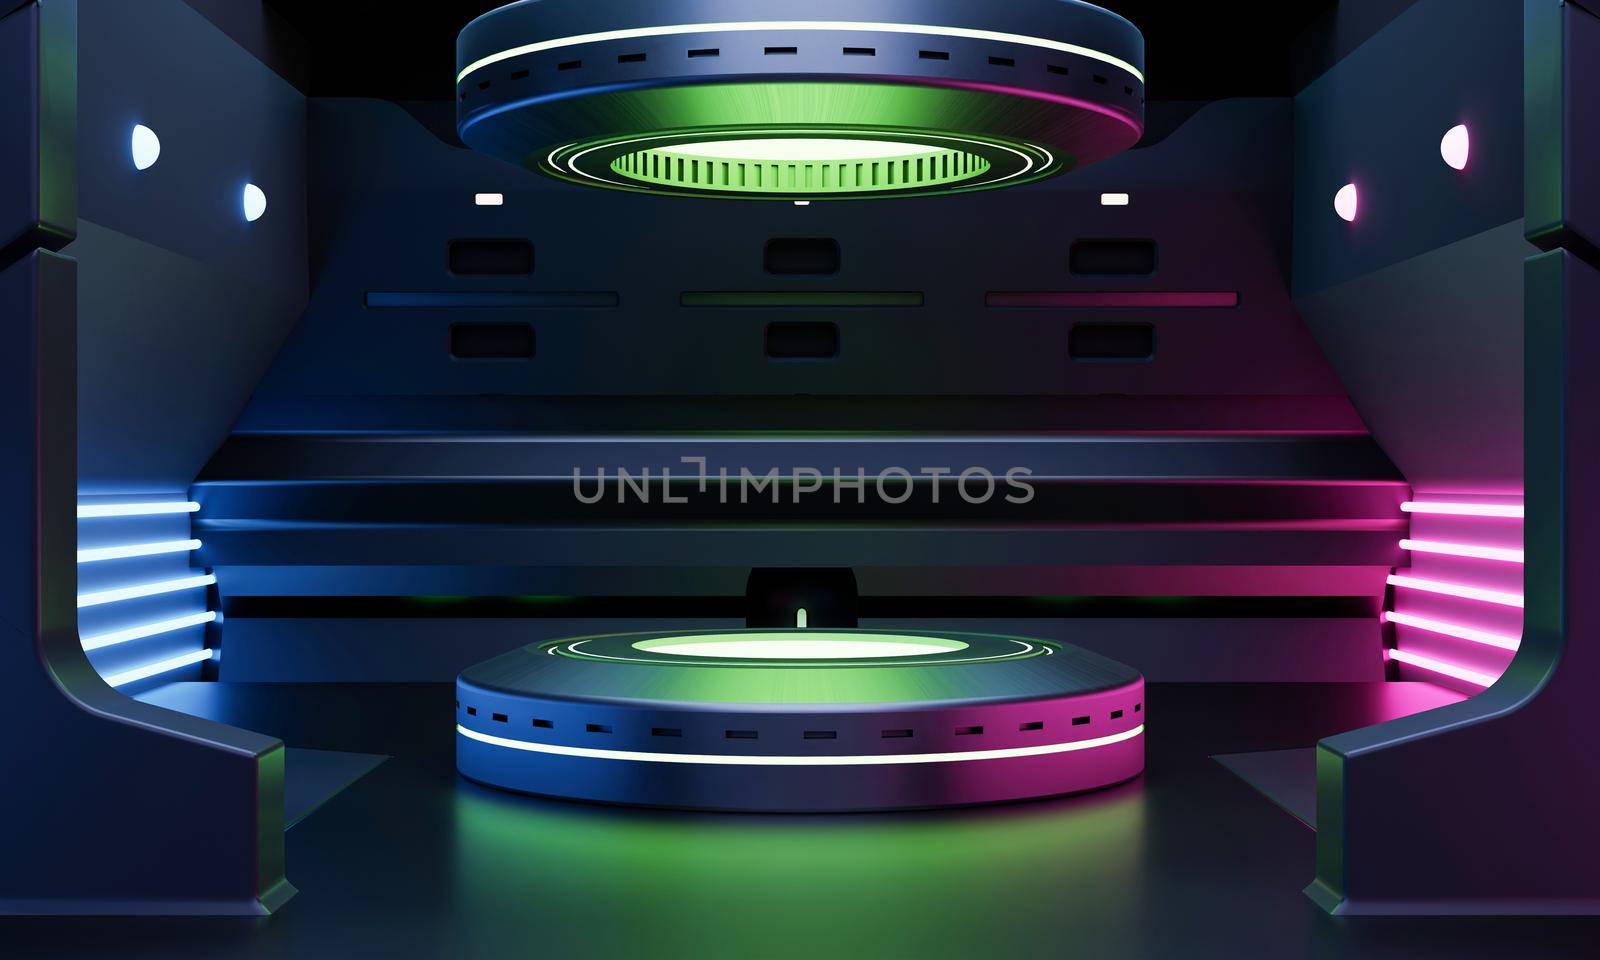 Cyberpunk sci-fi product podium showcase in spaceship with green blue and pink neon lighting background. Technology and object concept. 3D illustration rendering by MiniStocker